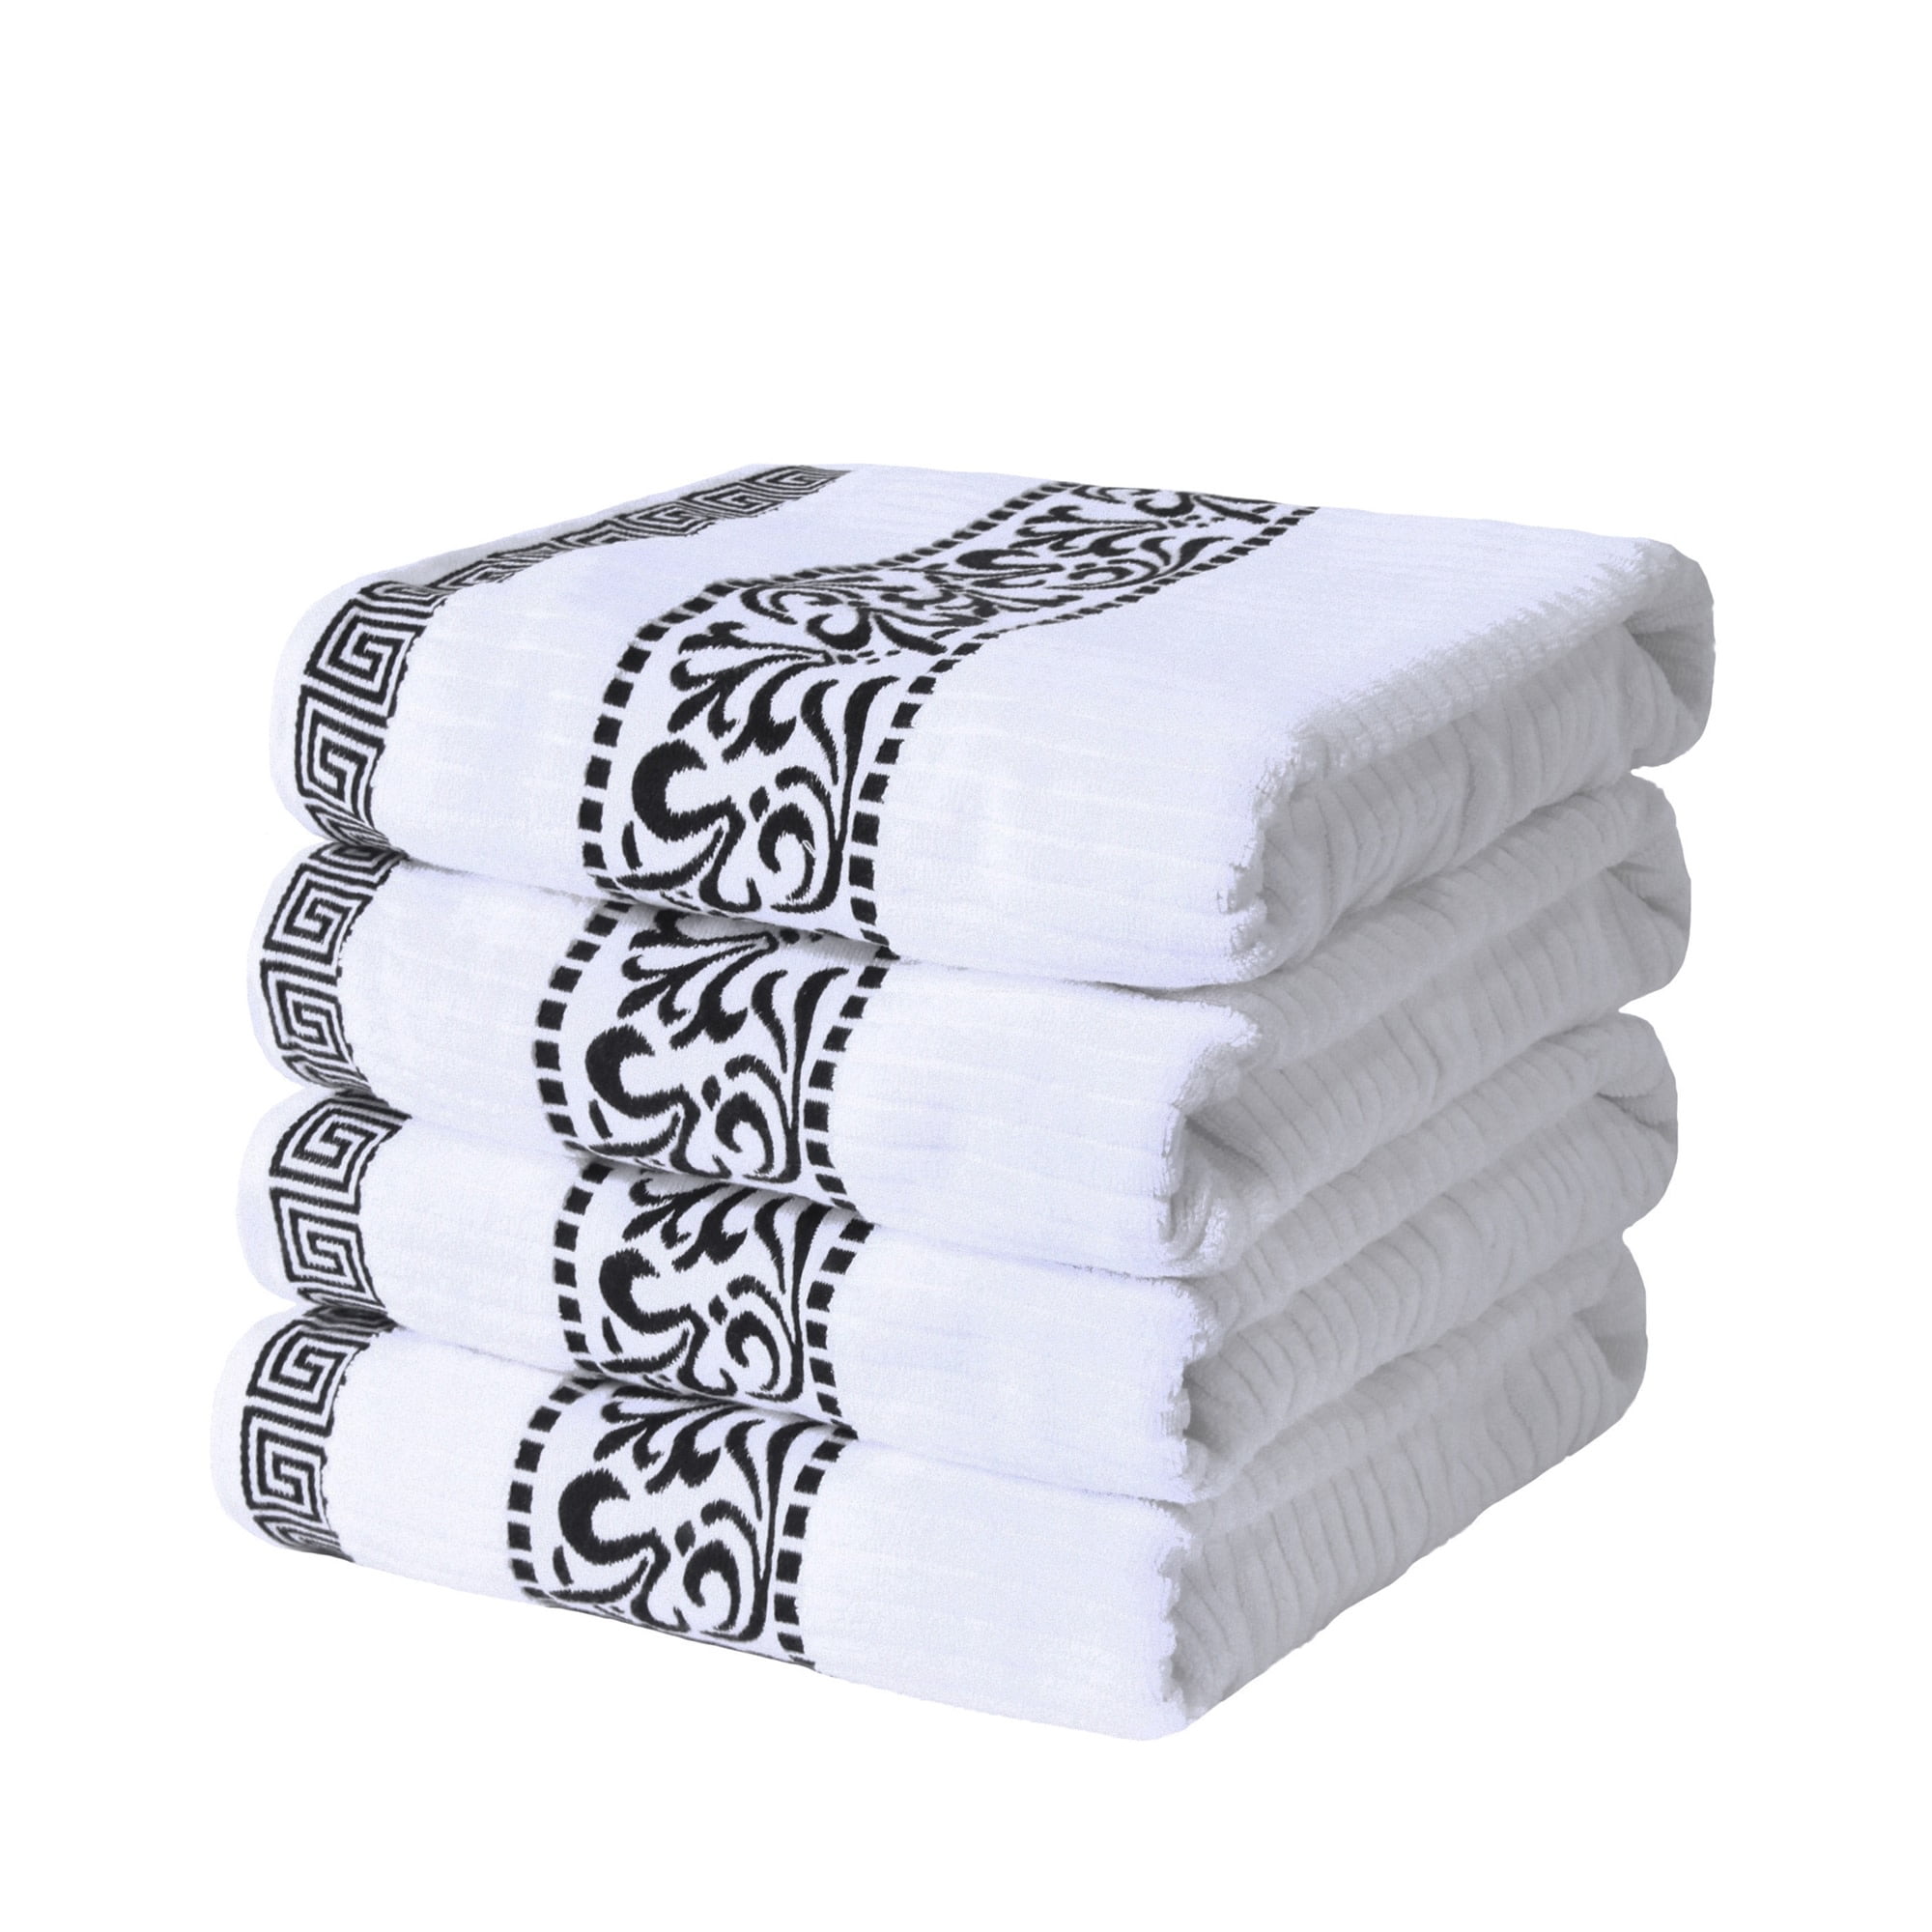 Superior Cotton Solid and Marble Towel Set 10 PC Mixed Black Piece